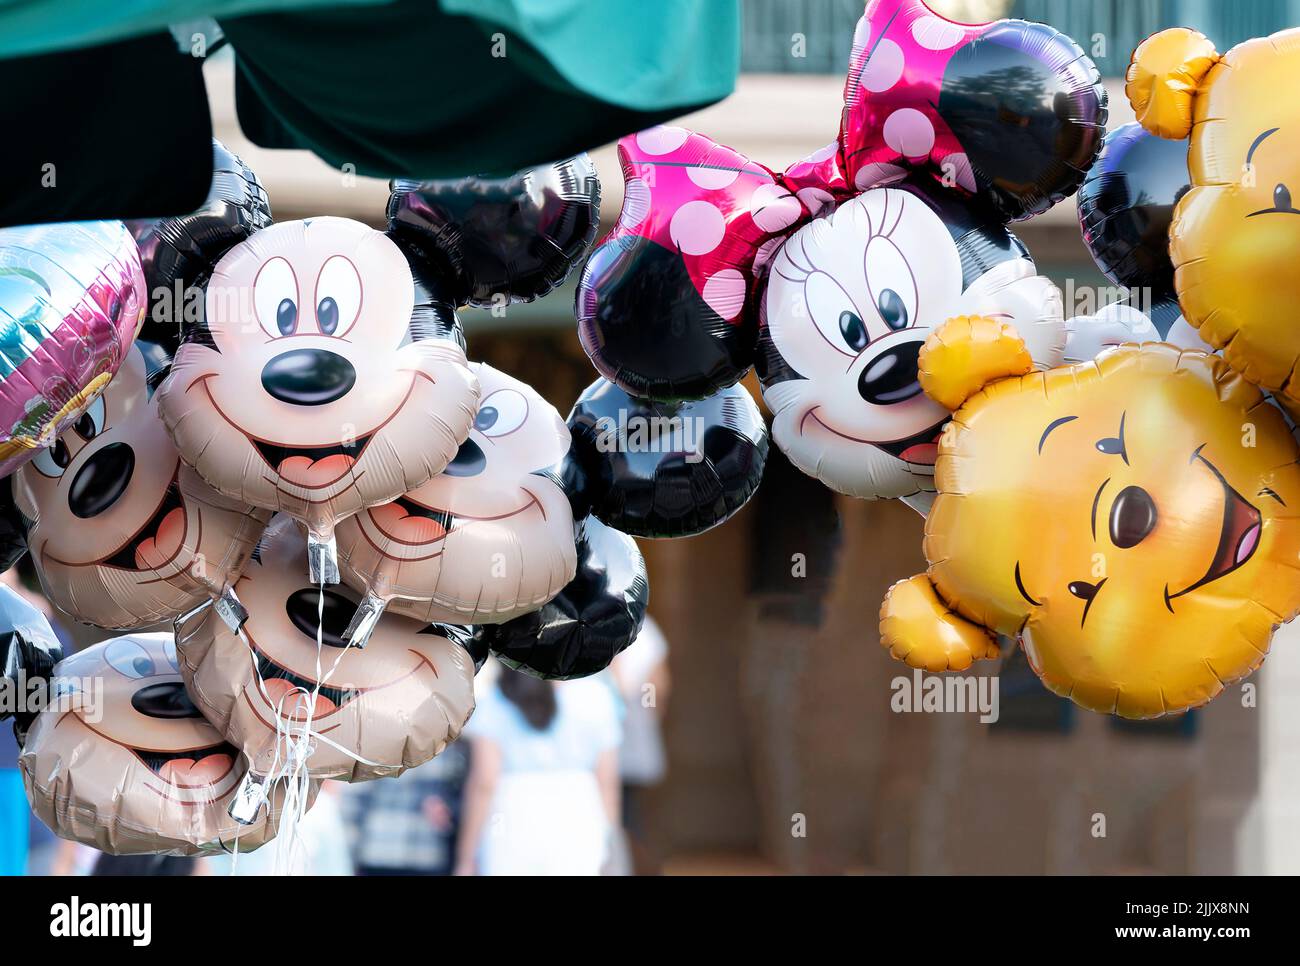 A group of inflated Micky Mouse, Minnie Mouse and Pooh bear foil  character helium balloons clustered together and floating facing the camera Stock Photo